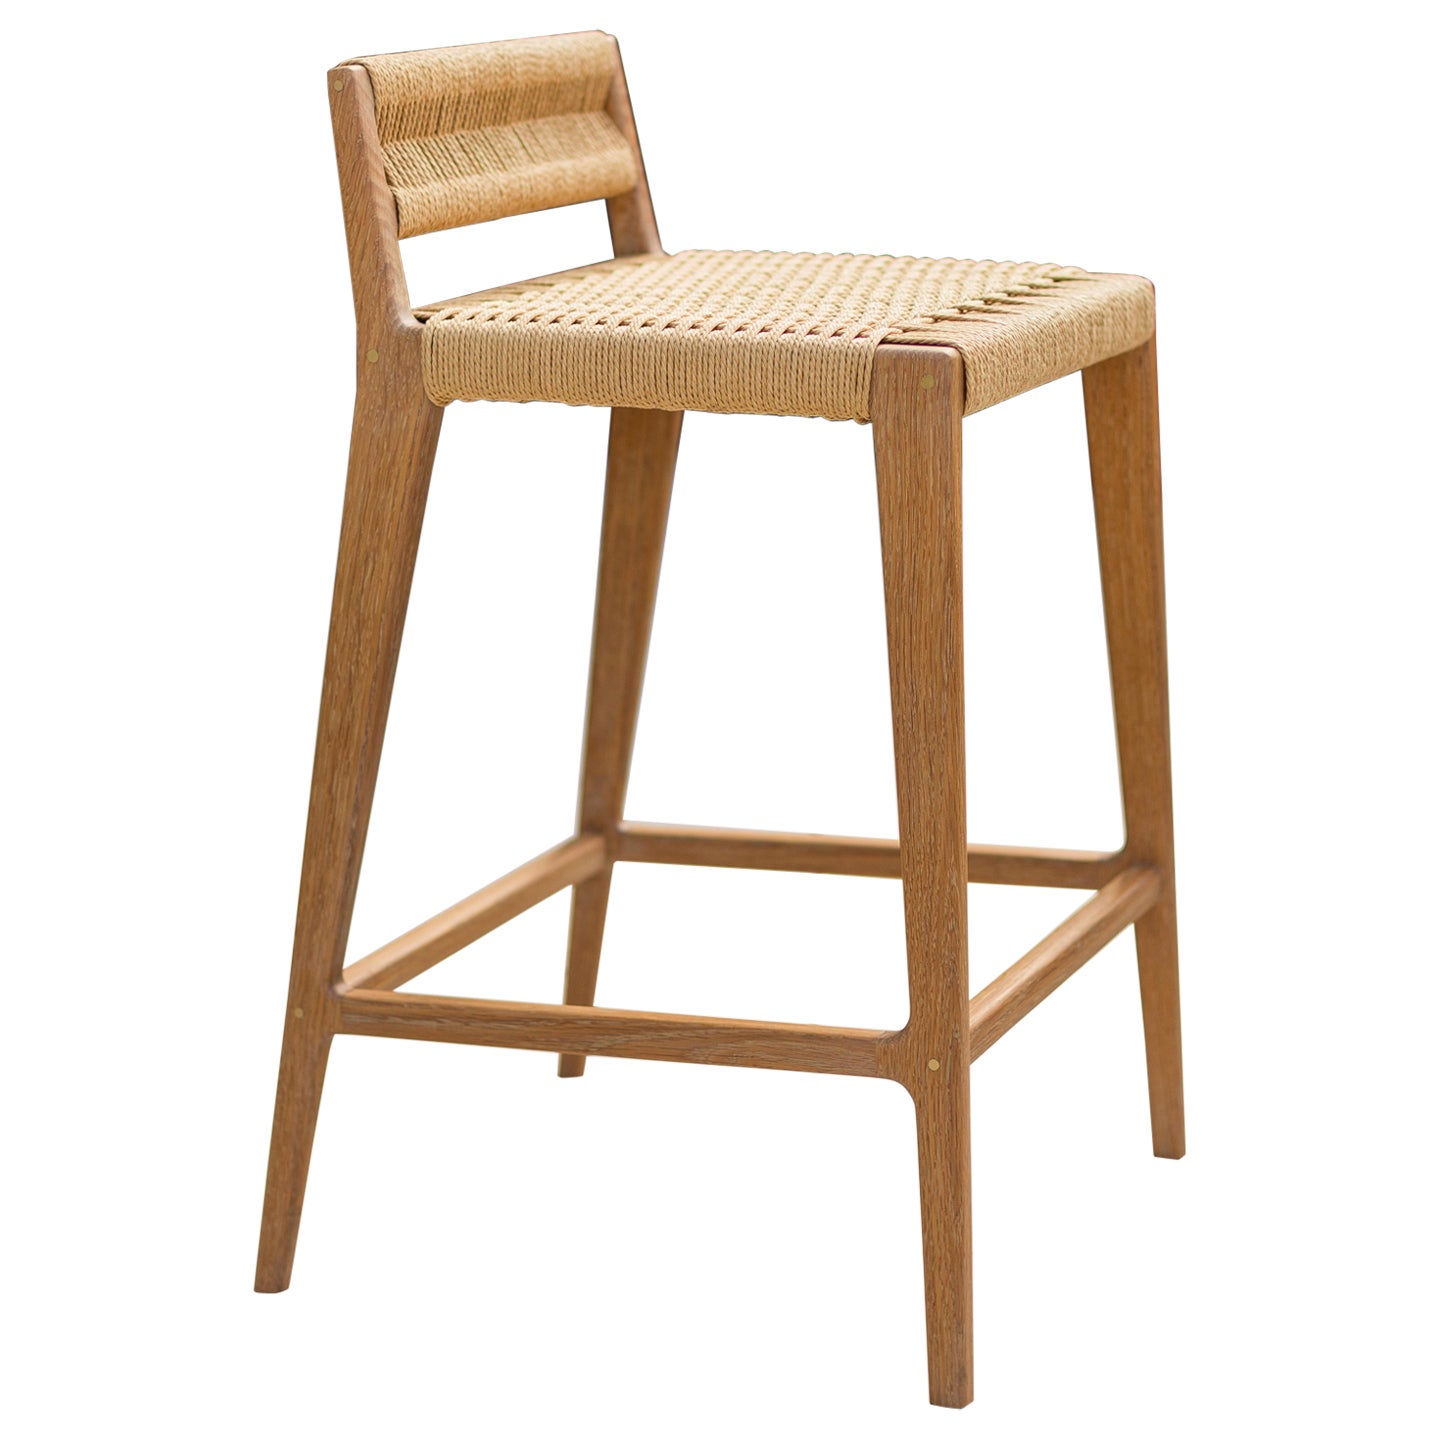 Travis Modern Stool with Woven Danish Cord Seat and Low Back in White Oak For Sale